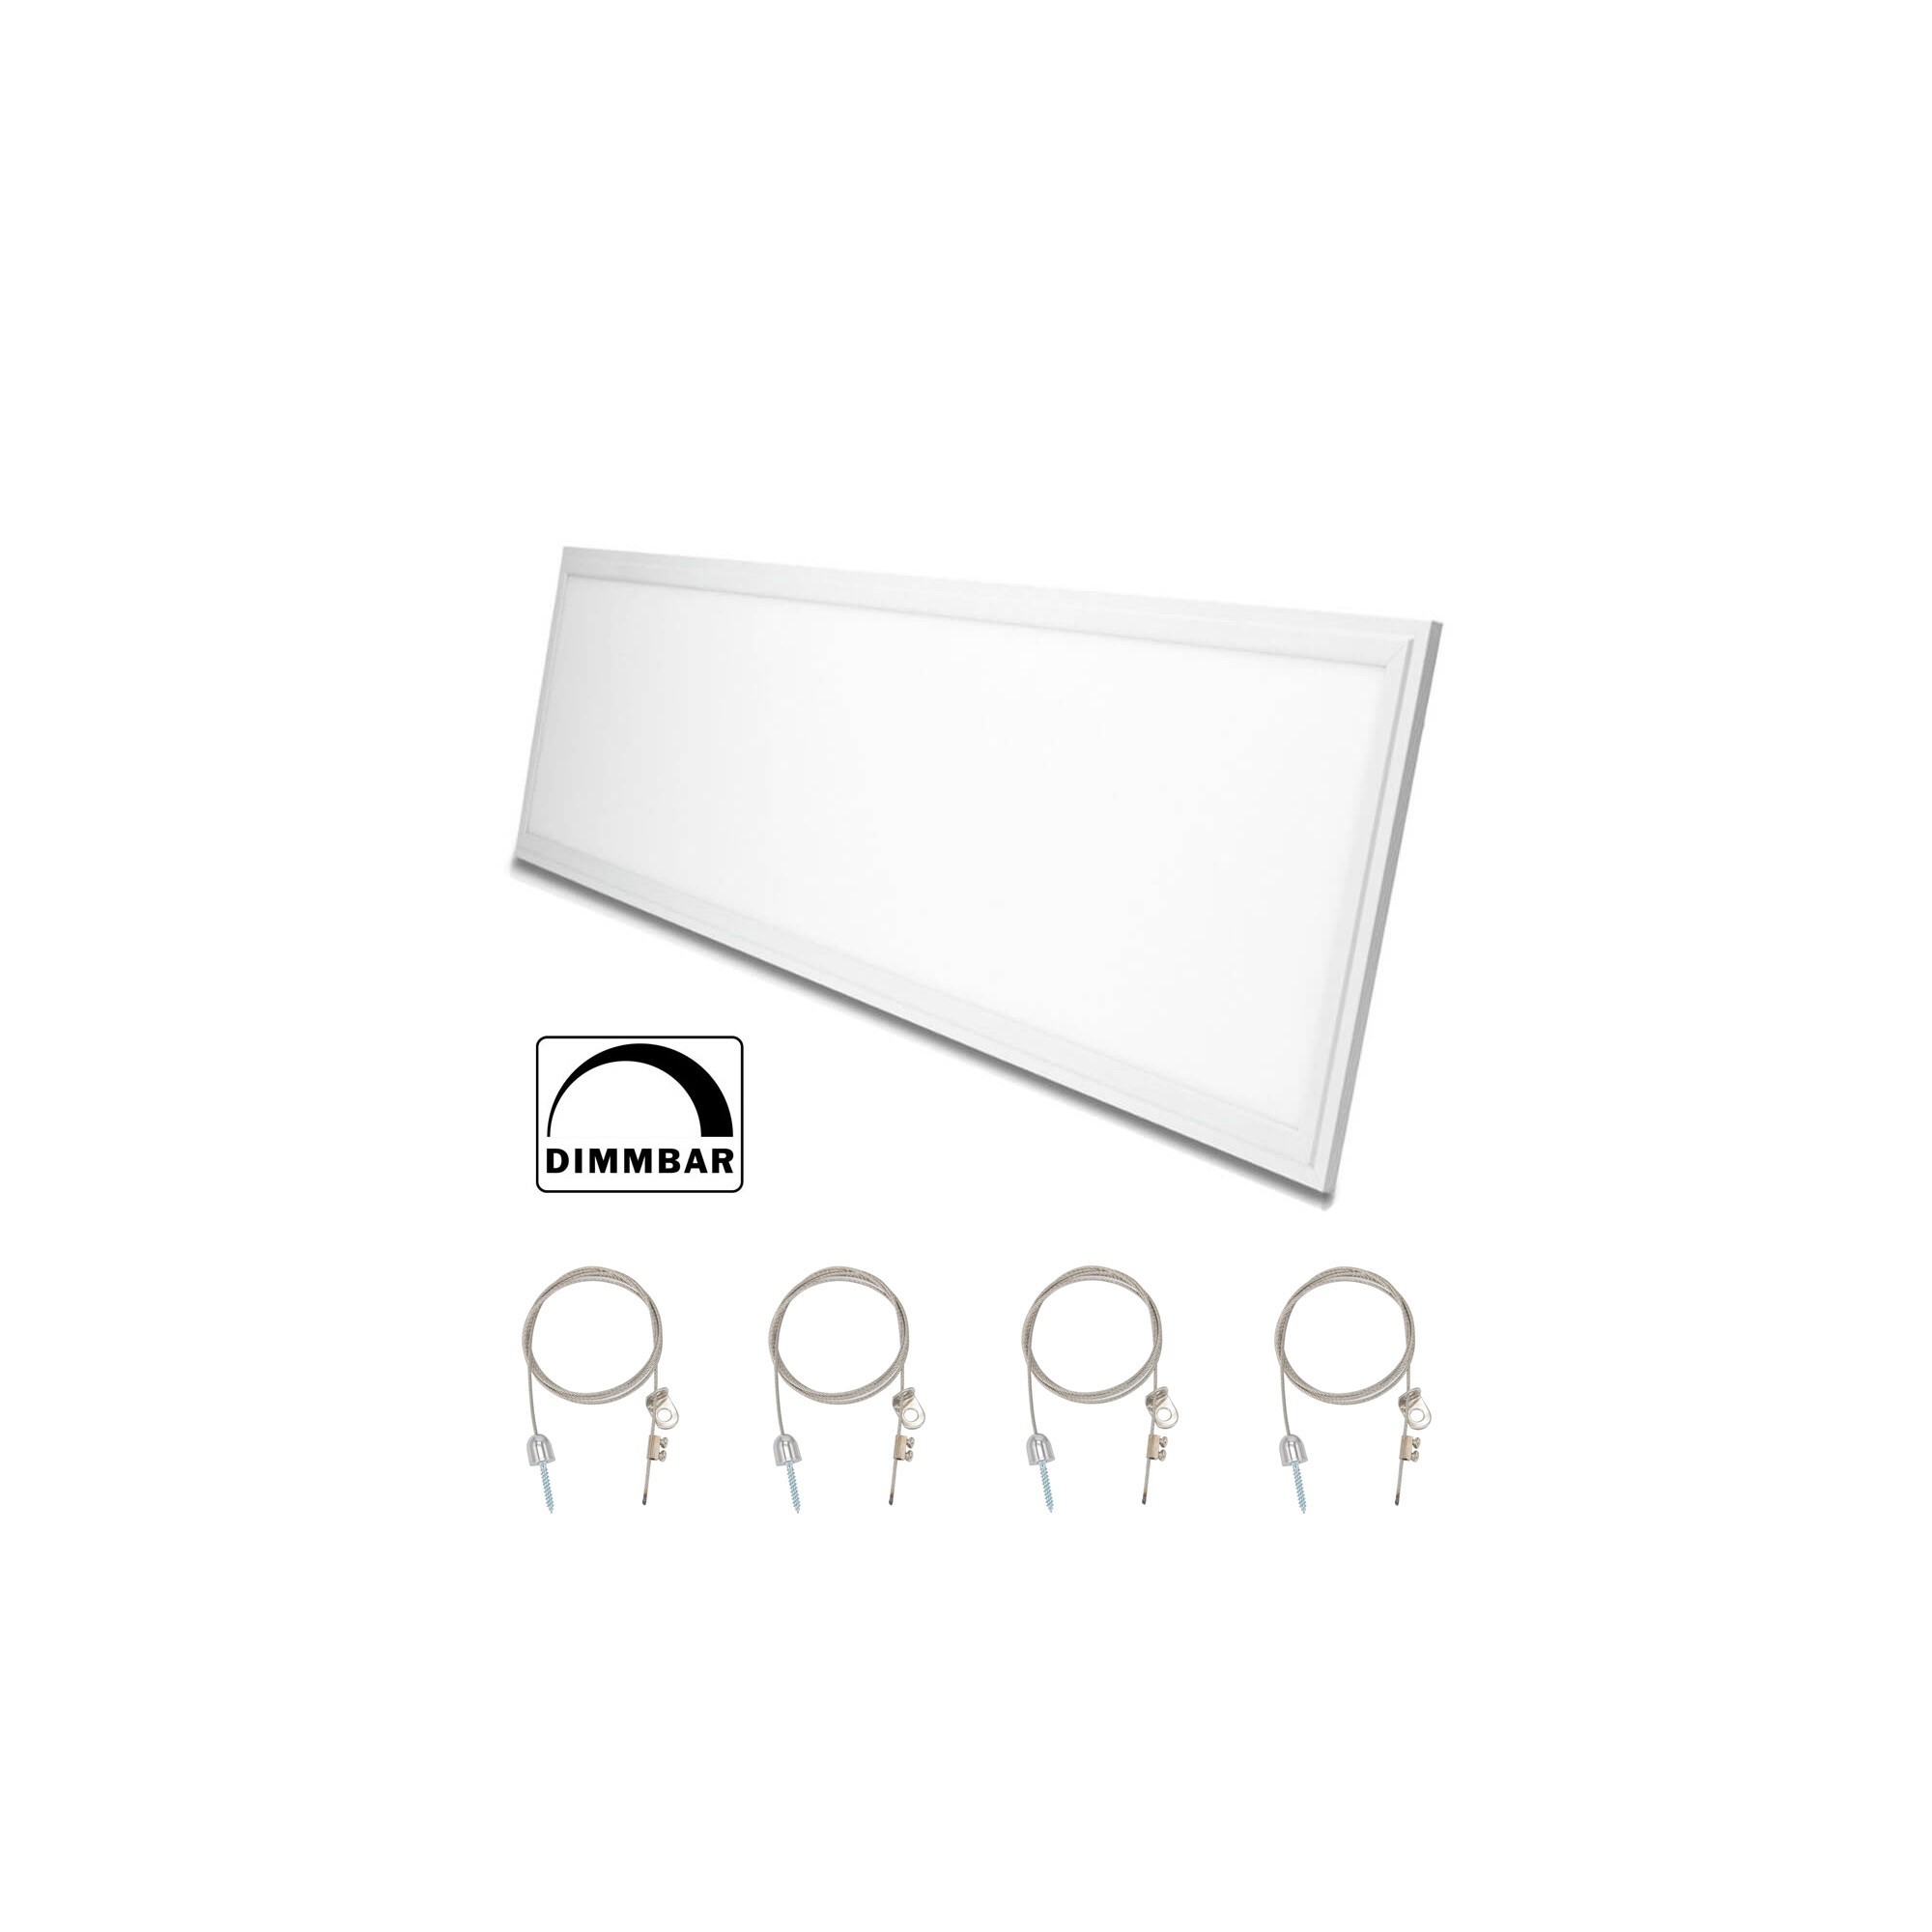 Ultra-flat design LED panel dimmable white 120 x 30cm, 4000K 36W Including wire suspension Set